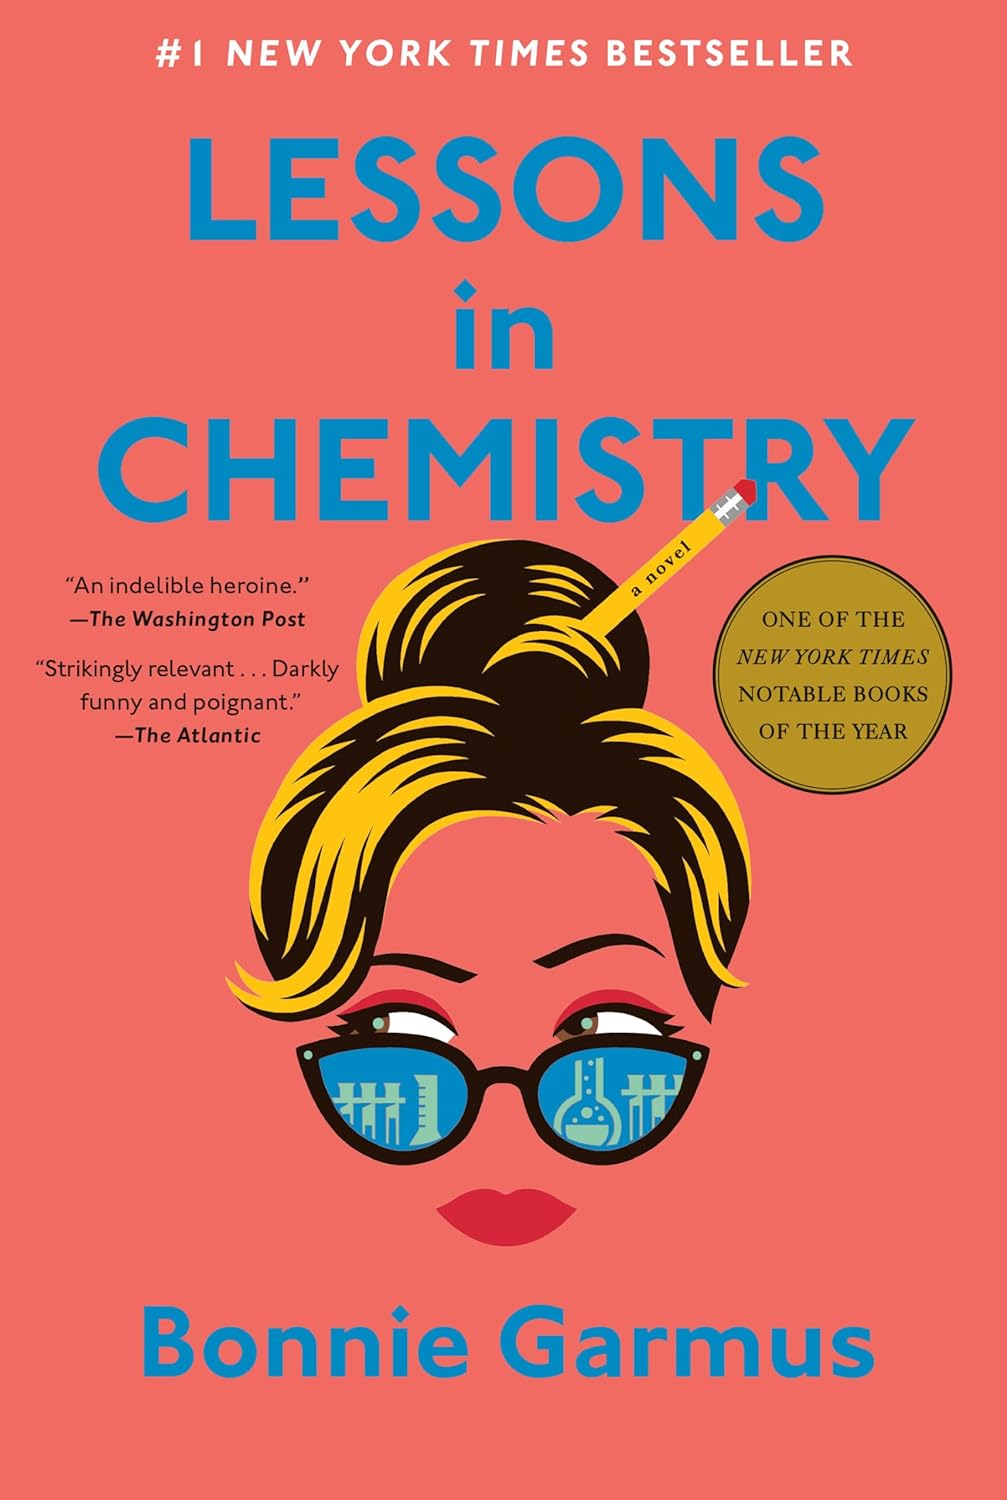 One of our recommended books is Lessons in Chemistry by Bonnie Garmus